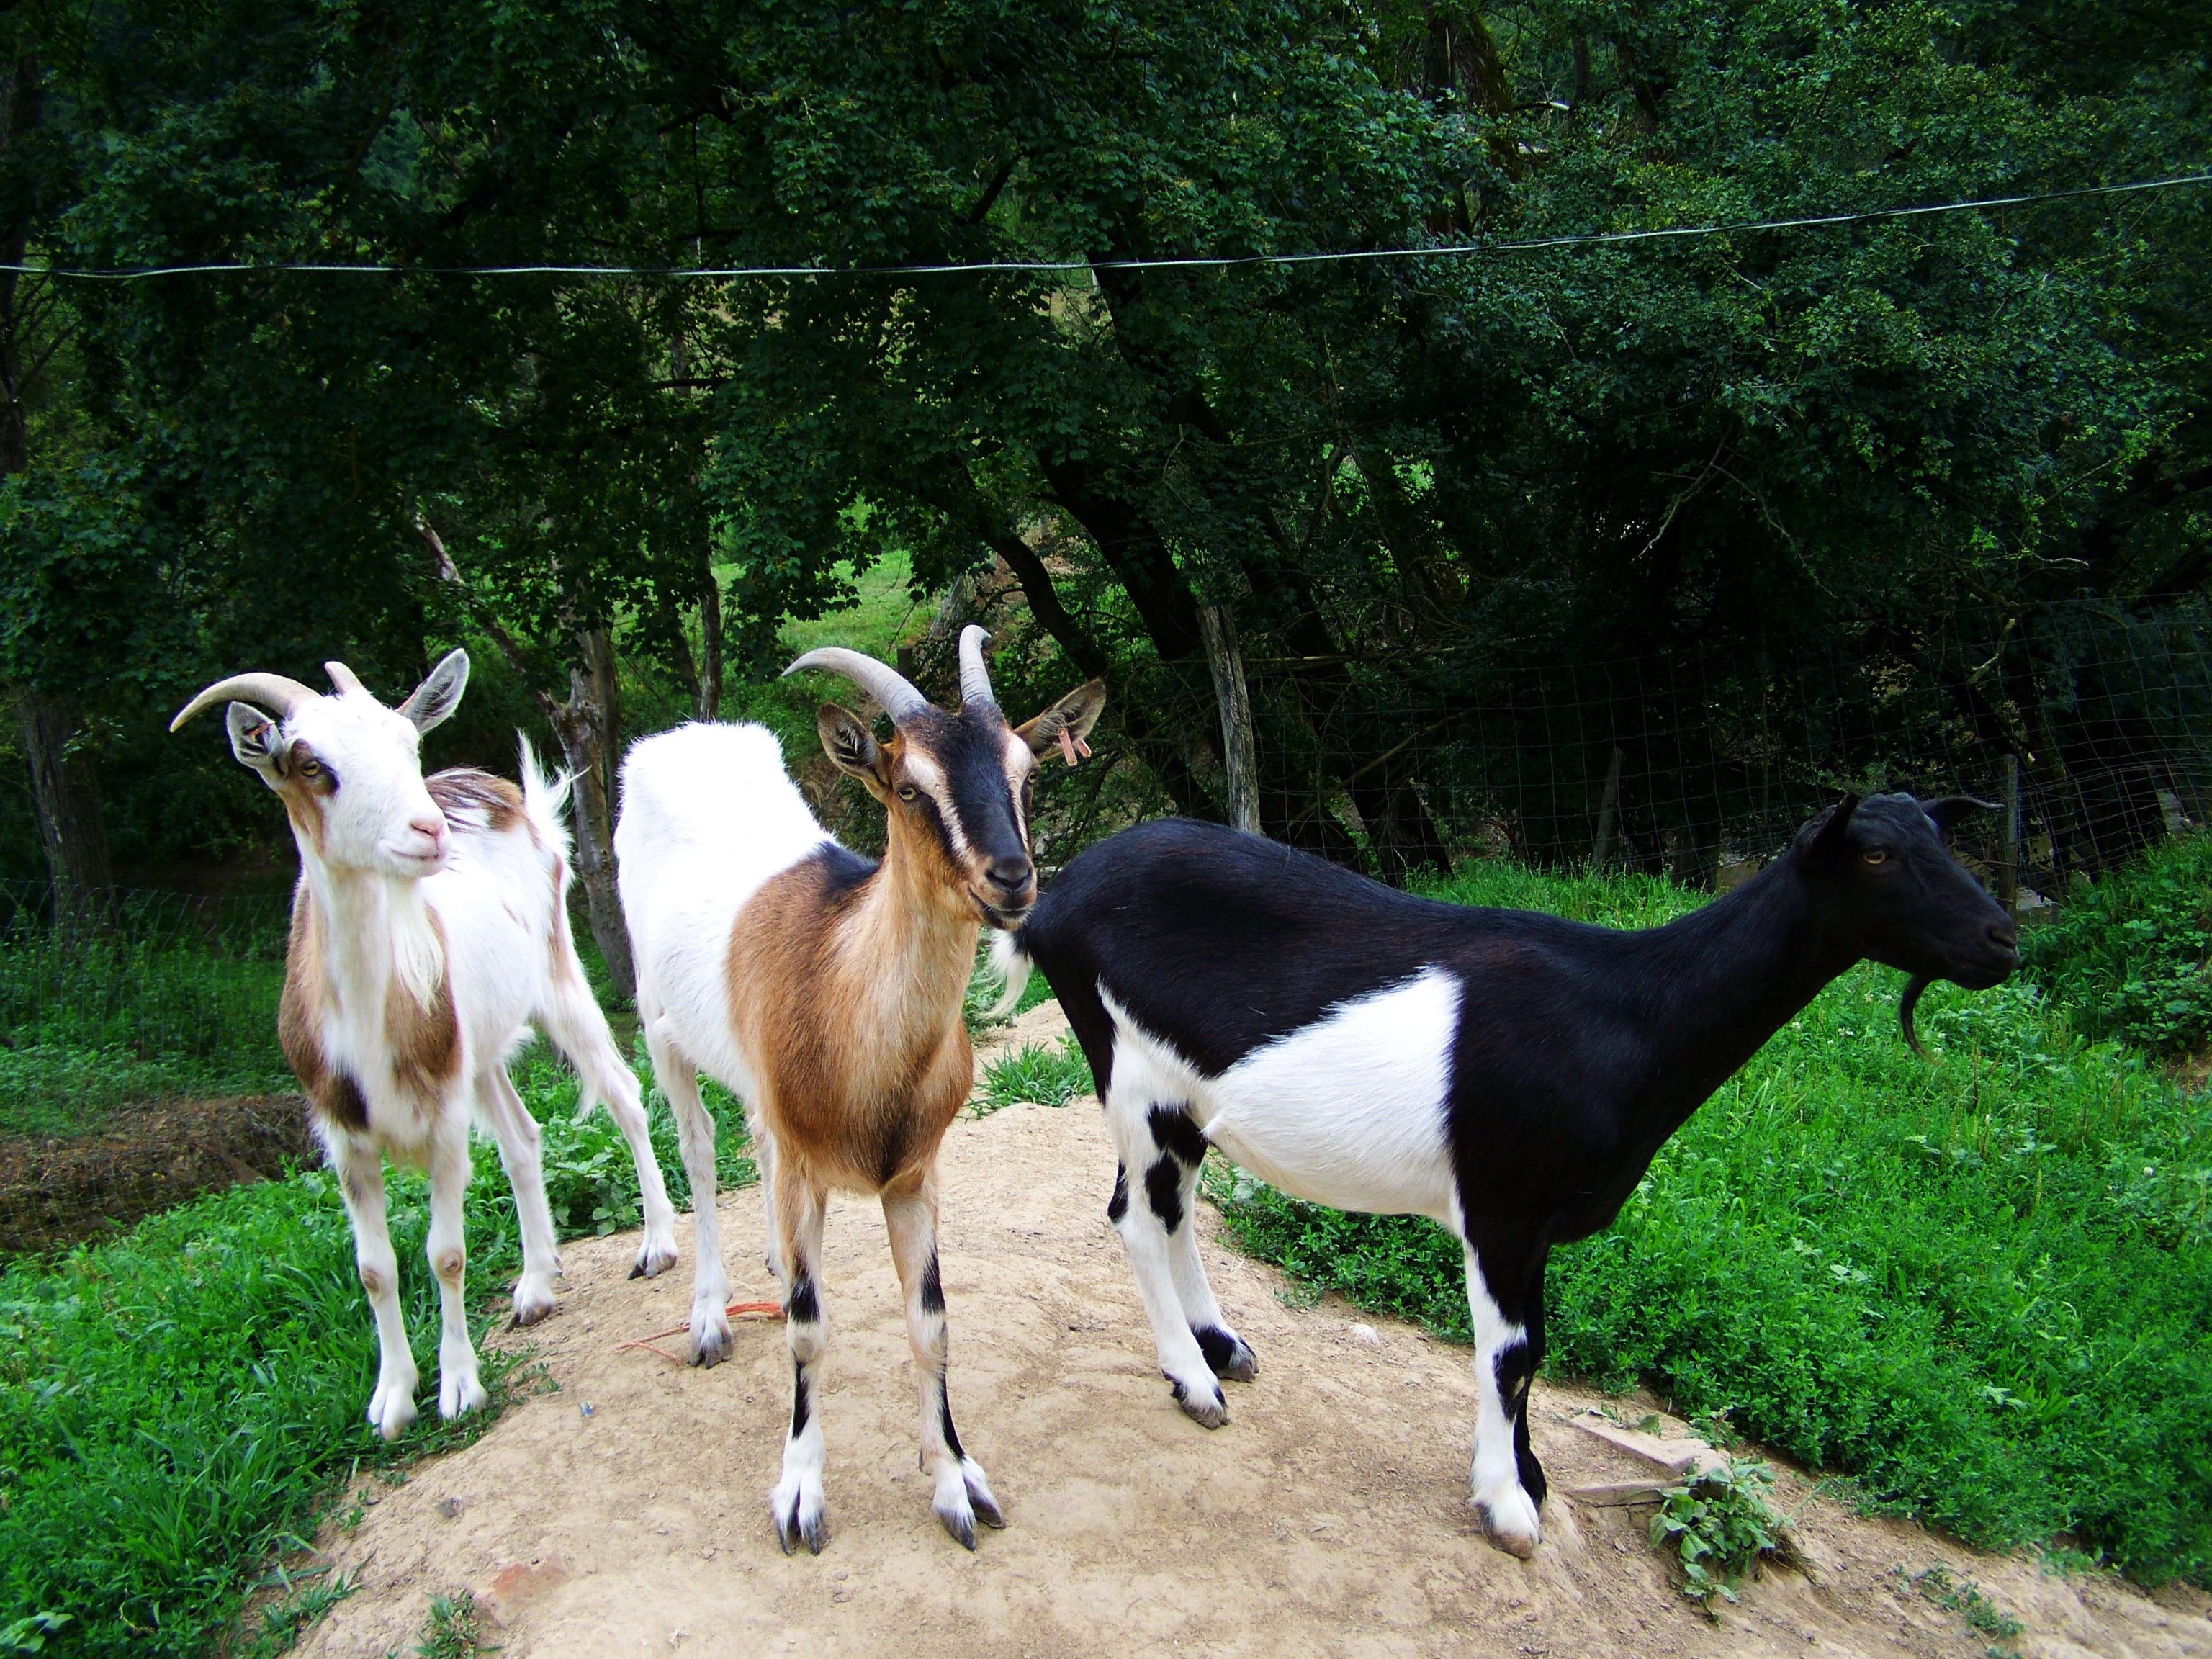 3 goats on a road